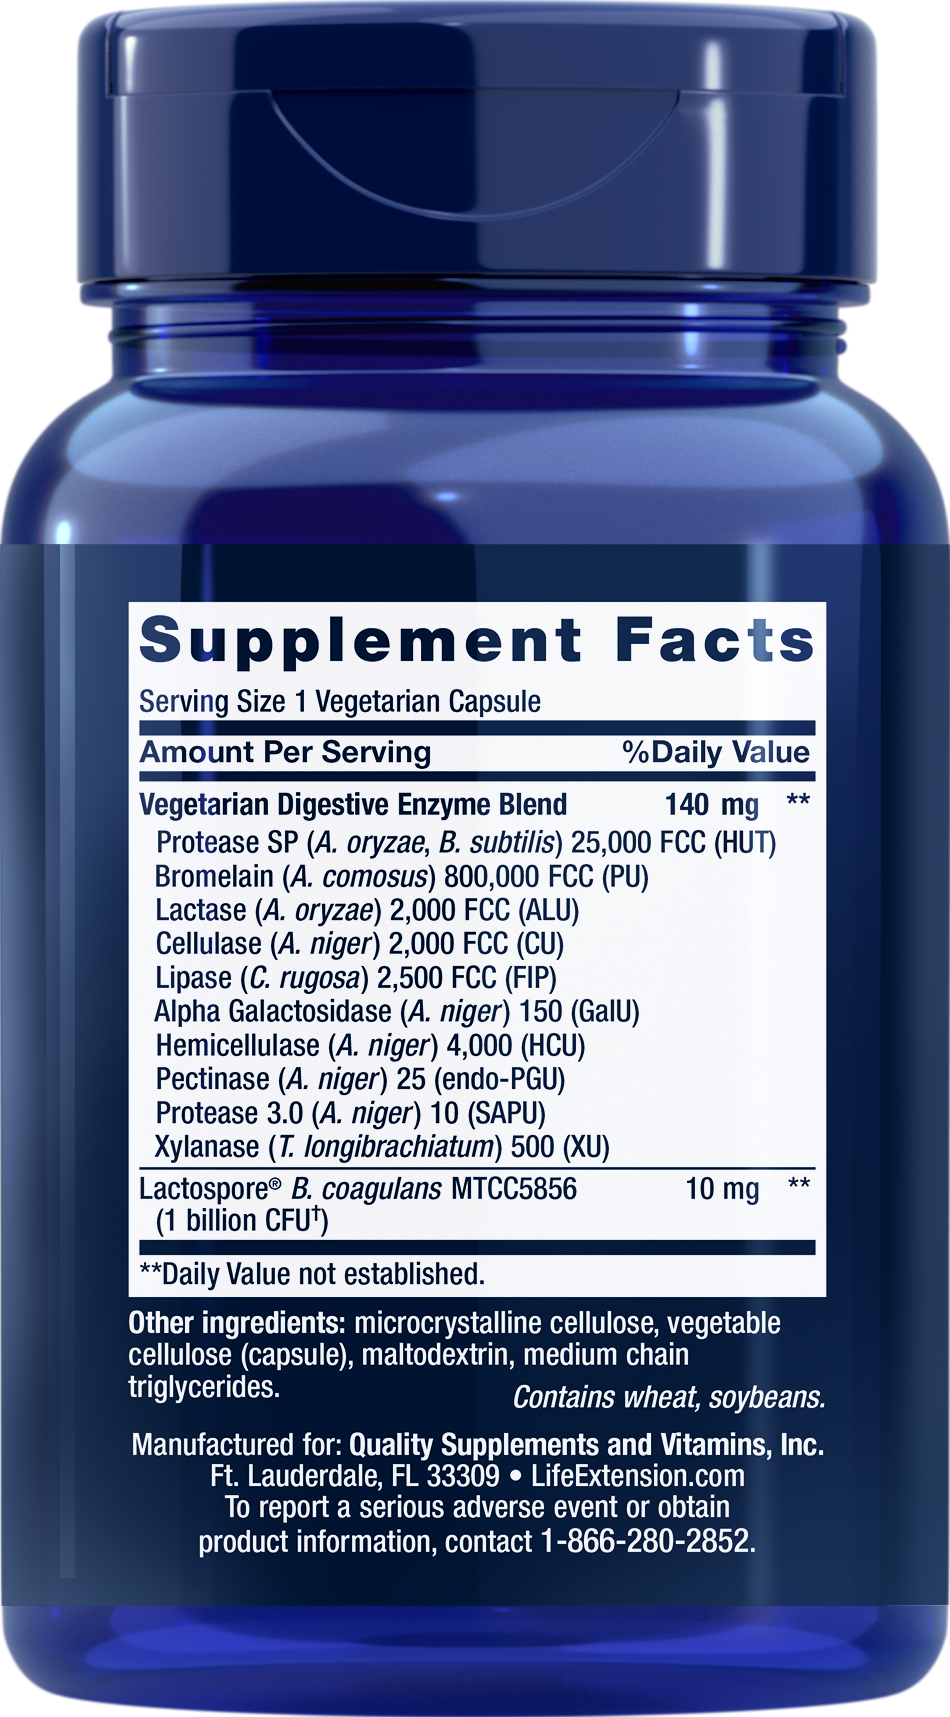 Life Extension Enhanced Super Digestive Enzymes (60 Vcaps)